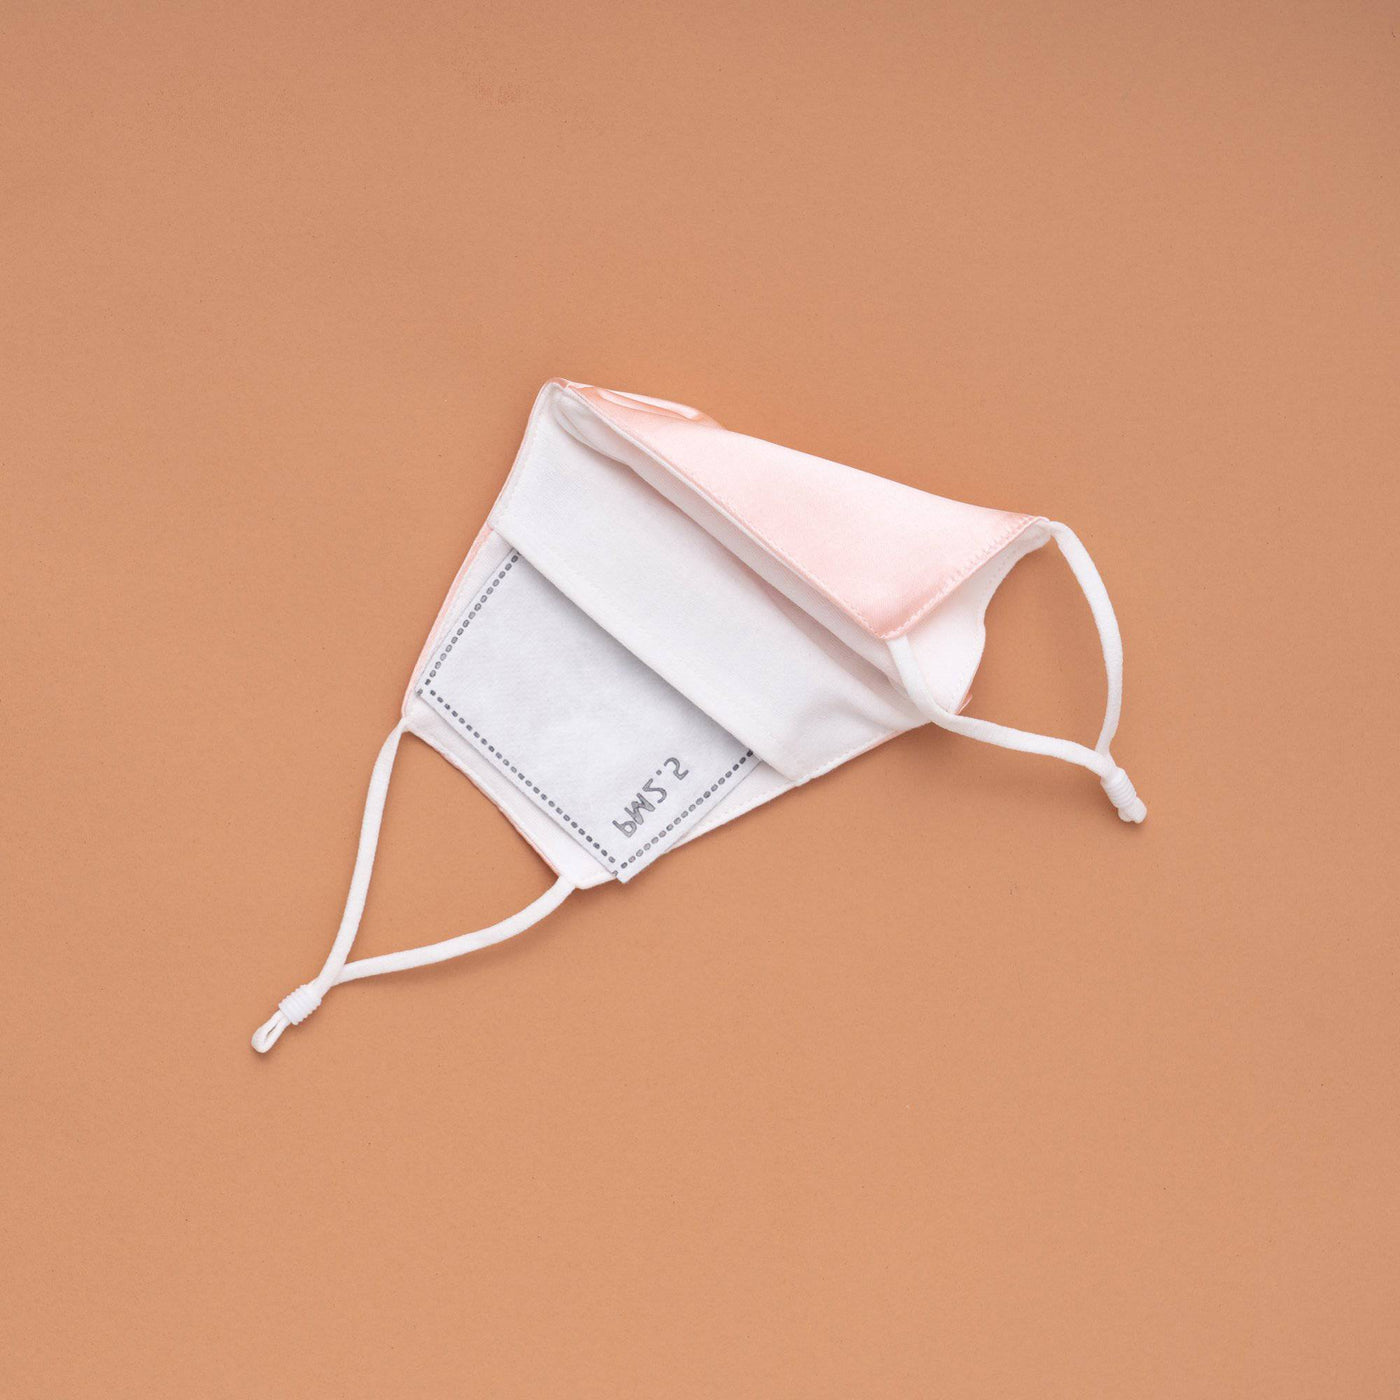 Lily Satin Face Mask Face Covering > facemask > satin facemask > washable facemask > cloth facemask > facemask with filter pocket > bridal facemask > facemask for wedding Claire & Clara With Filter Pocket Pink 